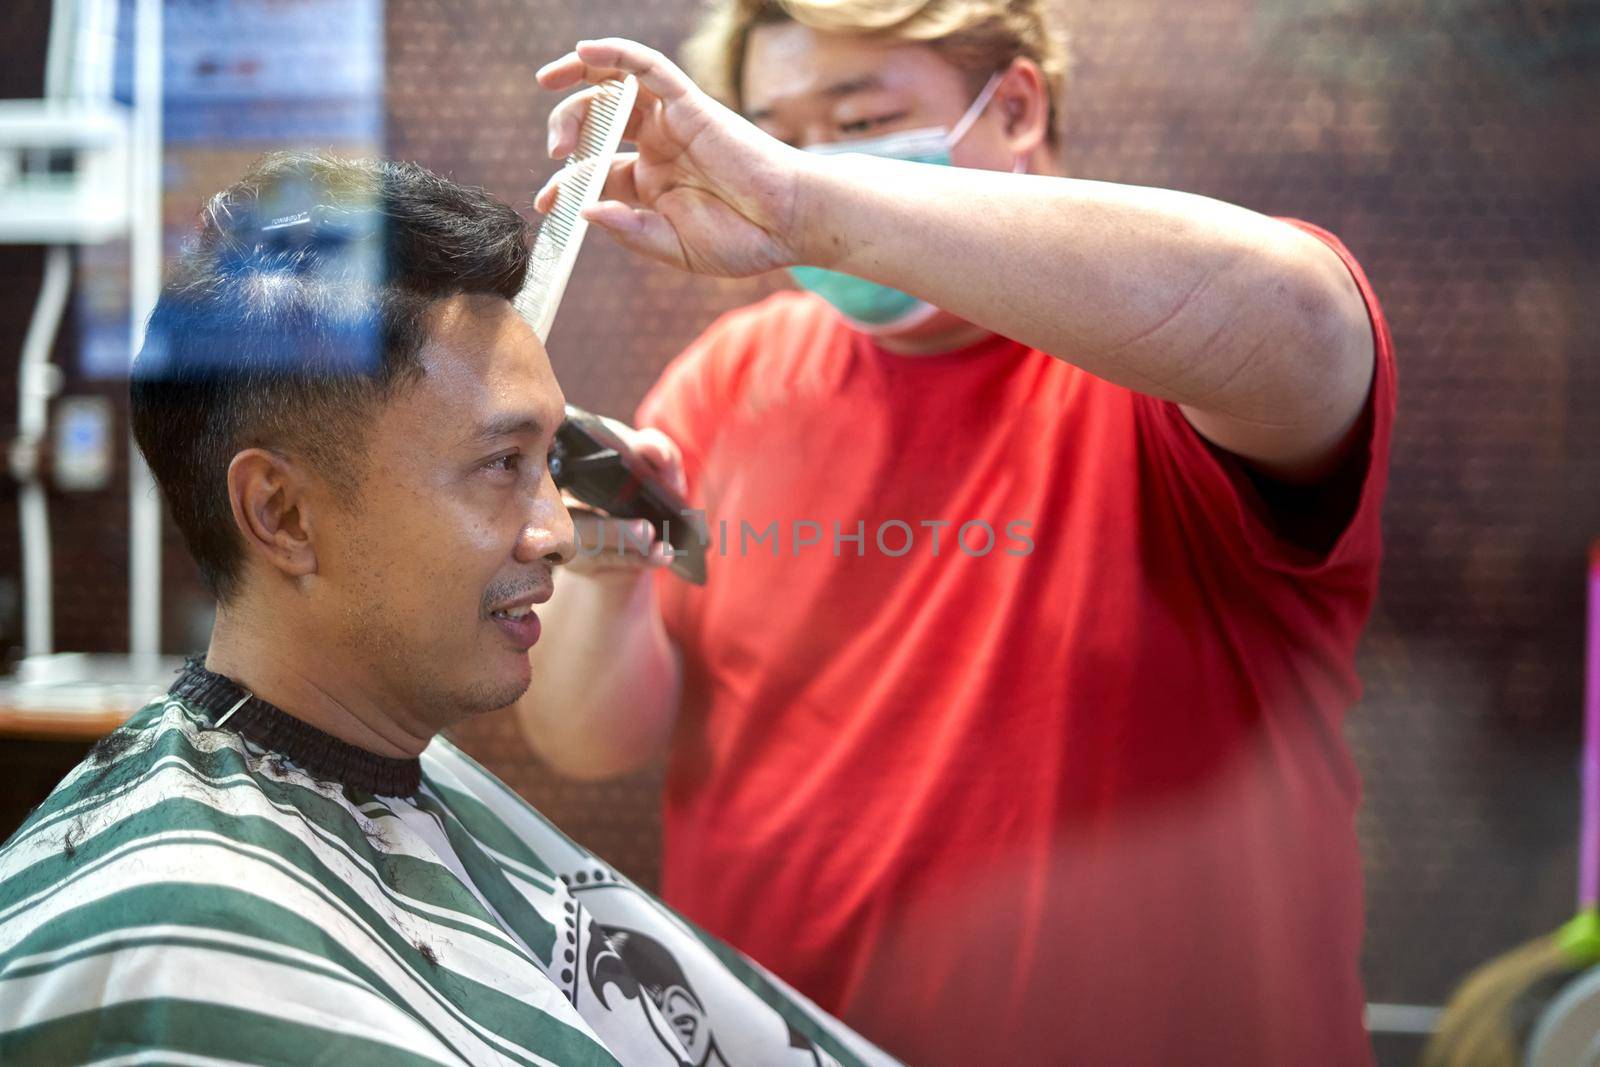 Fat barber with facial mask cutting the hair of an asian client in a barber shop by WesternExoticStockers